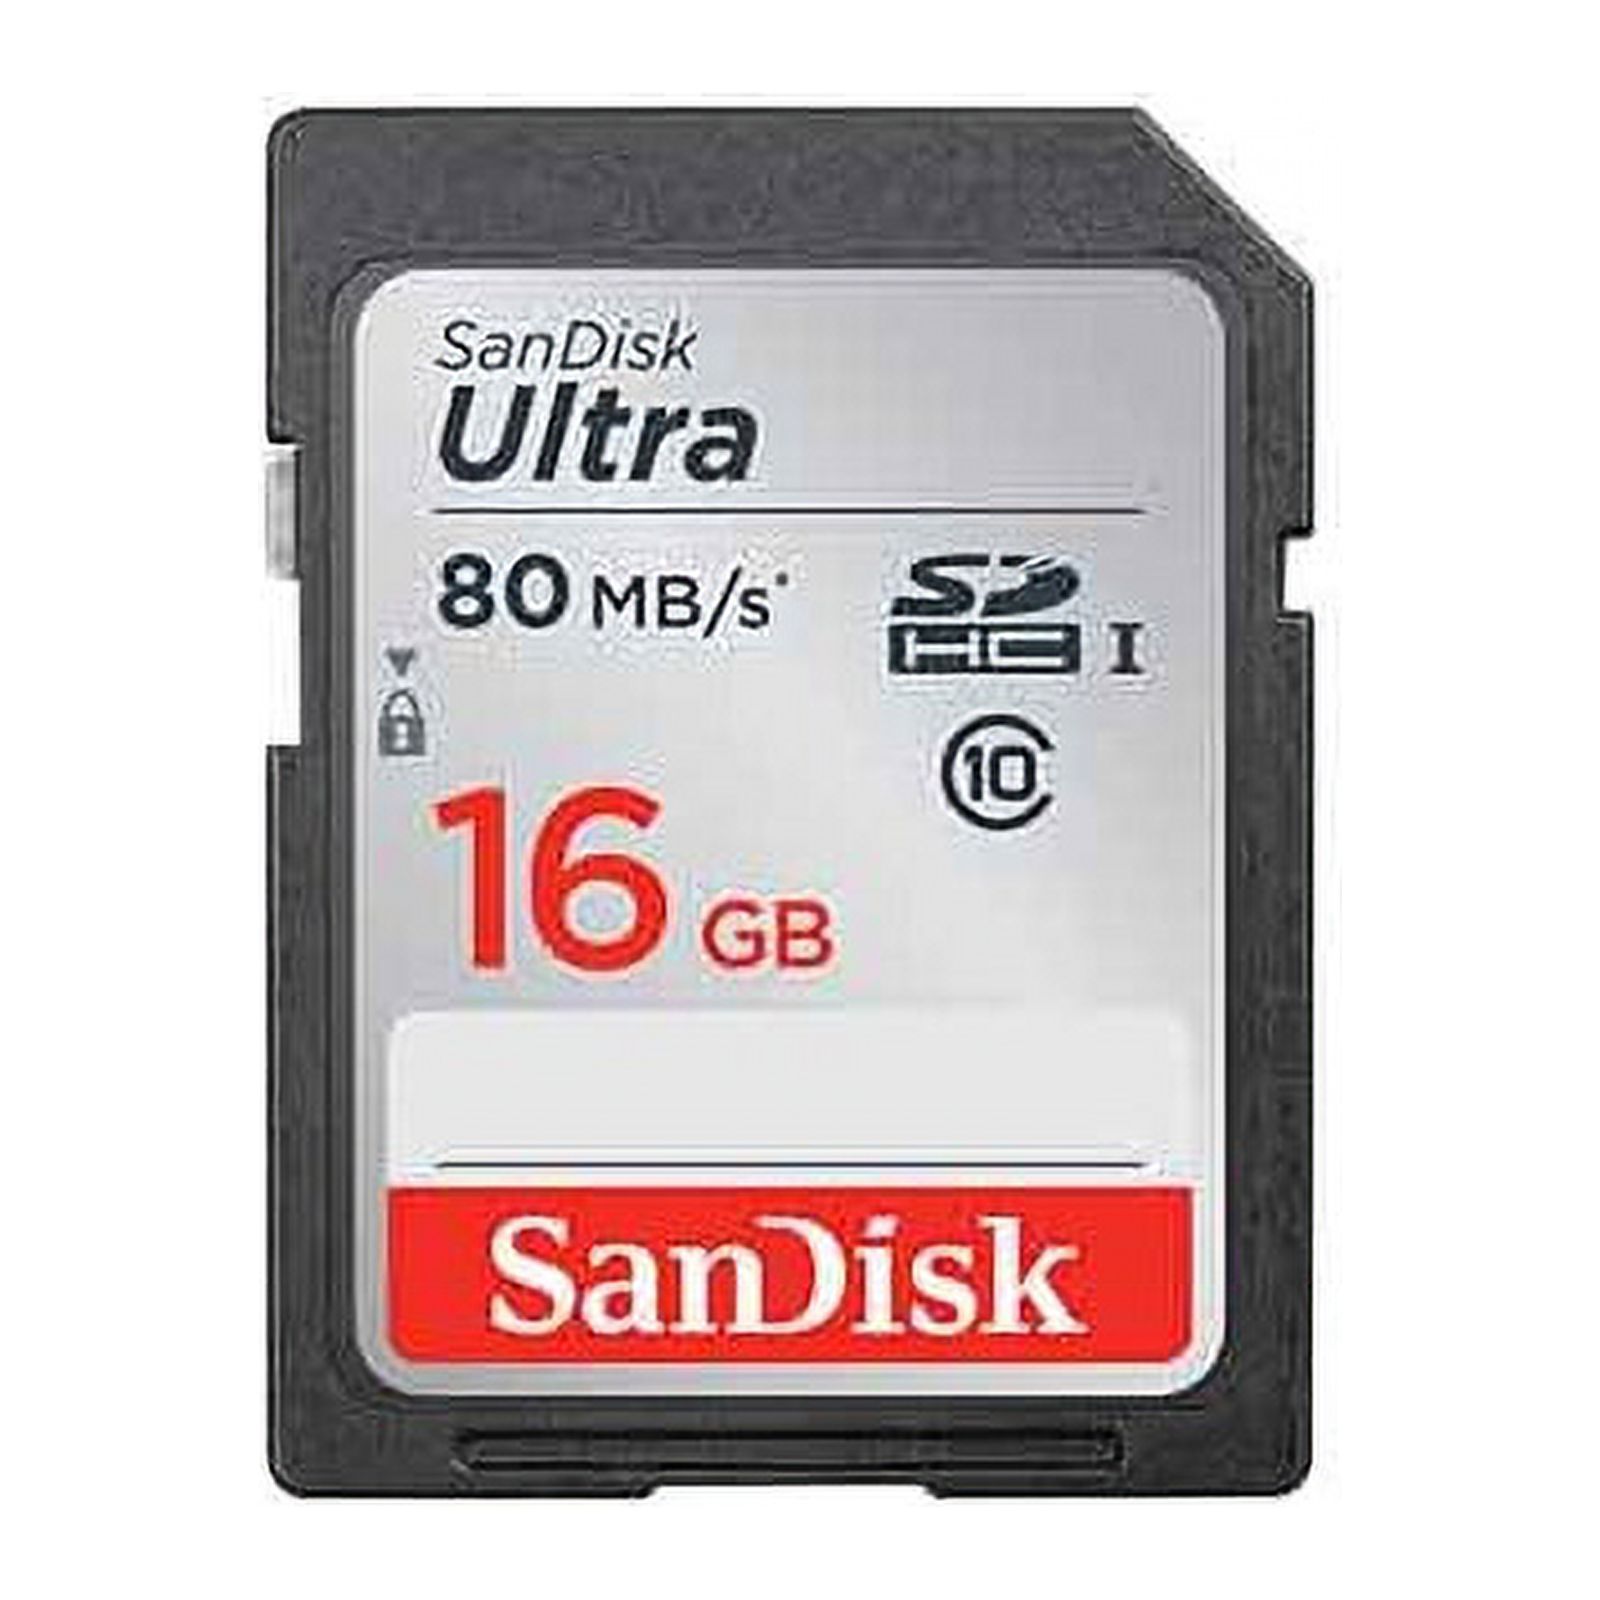 Sandisk SDSDUNC-016G-GN6IN 16gb Ultra Uhs-i Sdhc Memory Crd - image 4 of 5